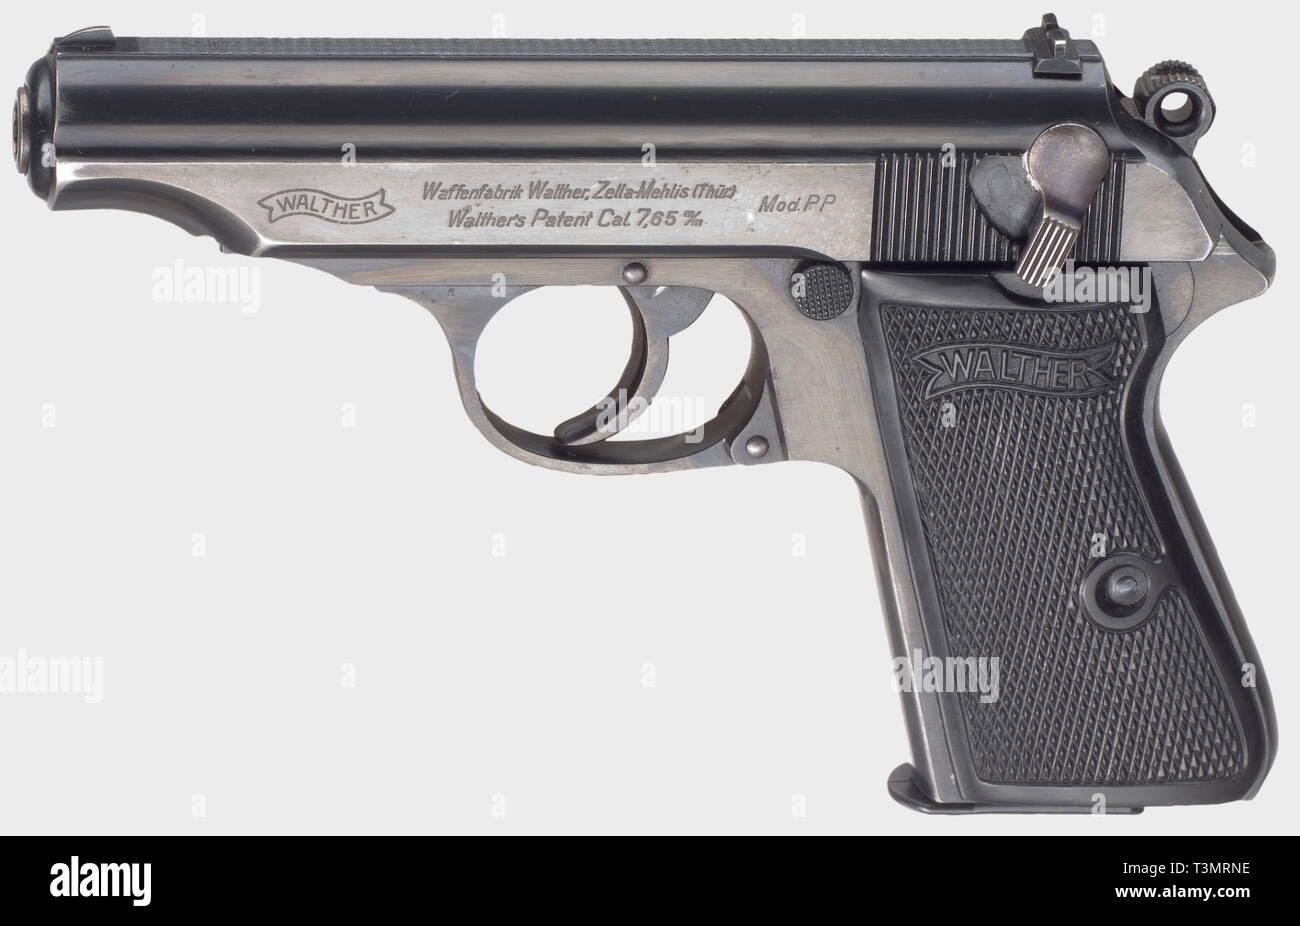 small-arms-pistols-walther-pp-um-pistol-caliber-765-mm-reich-ministry-of-justice-editorial-use...jpg